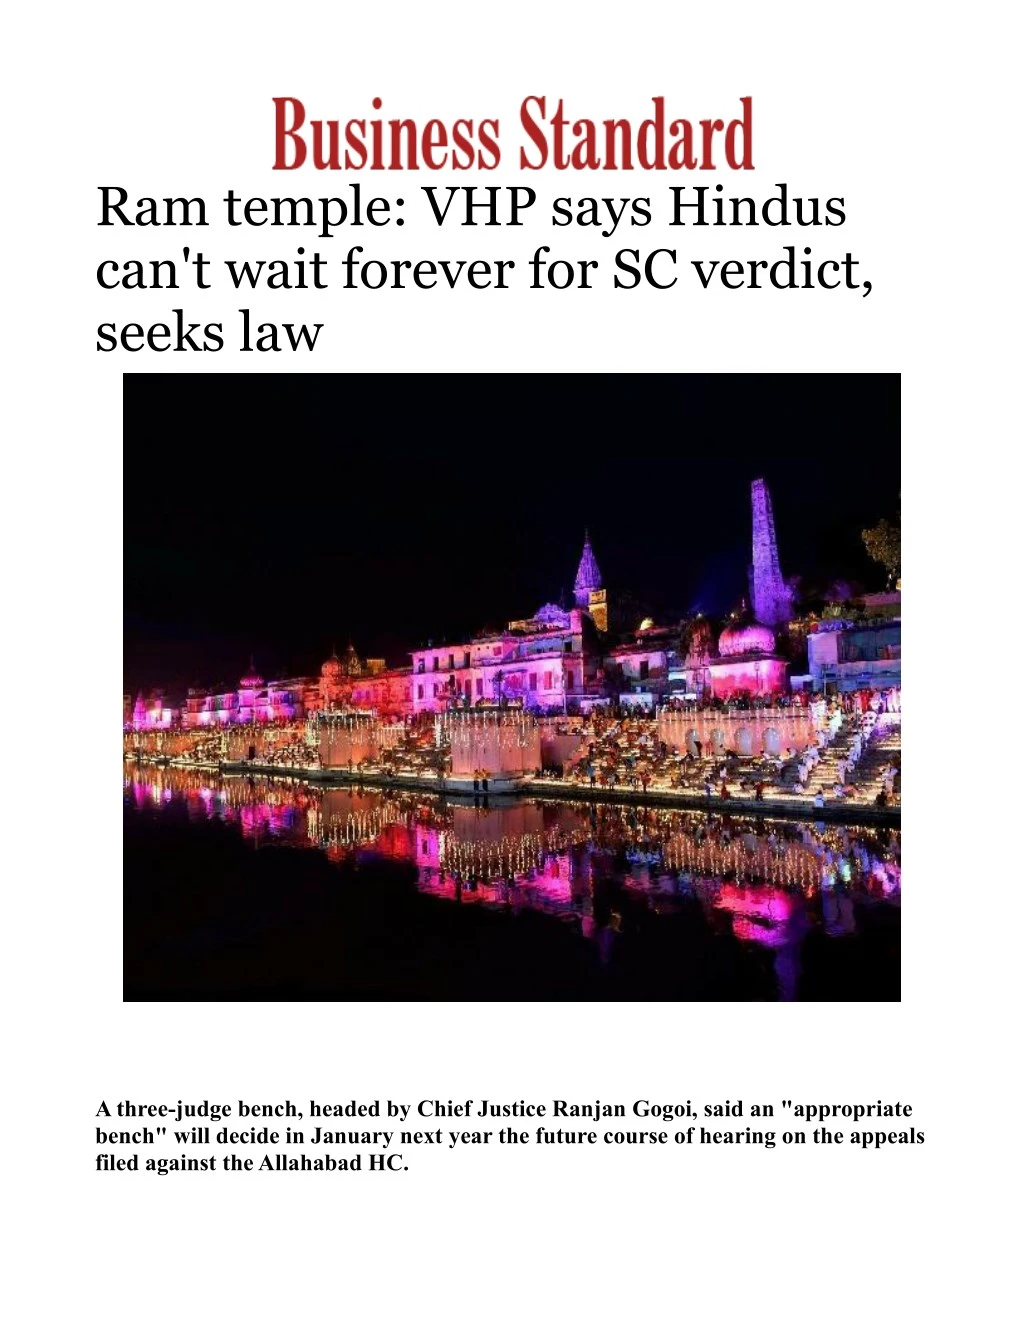 ram temple vhp says hindus can t wait forever